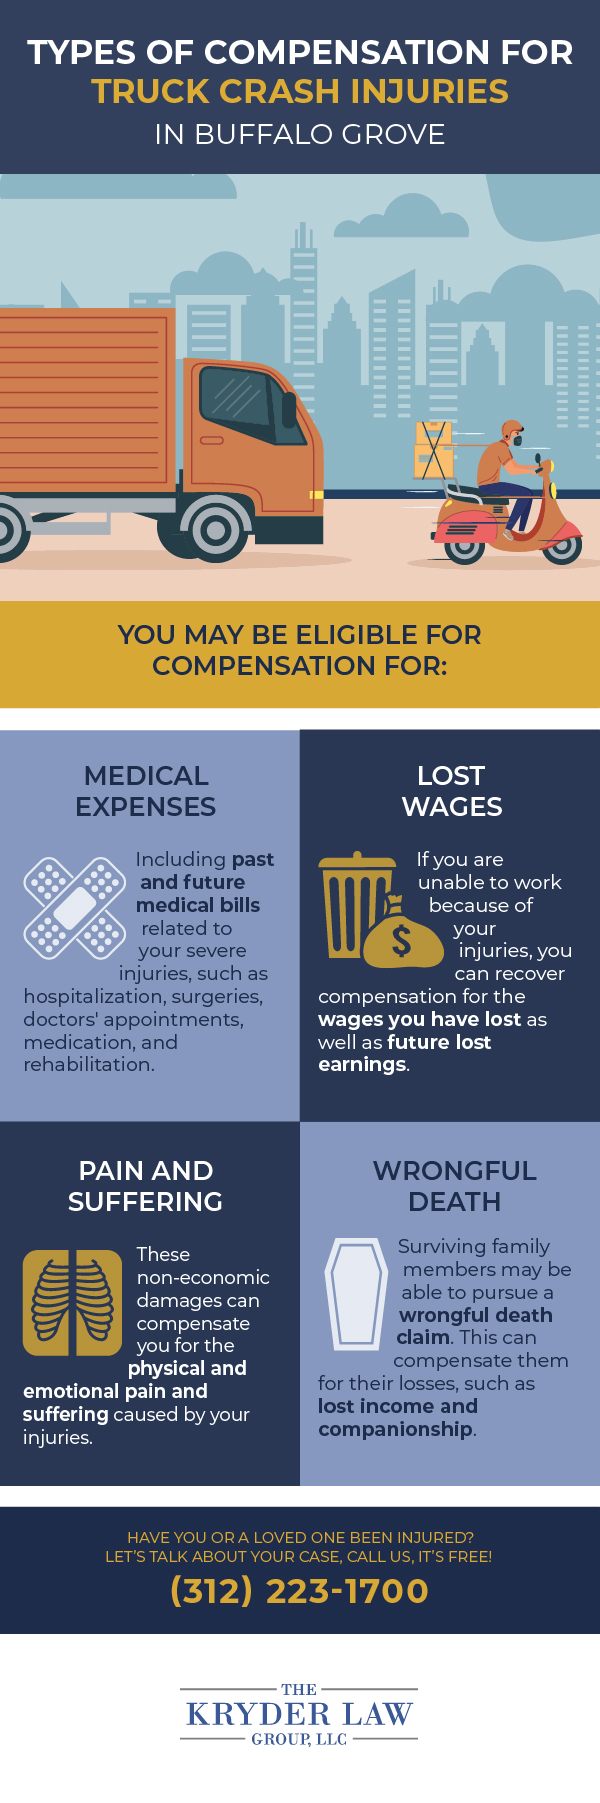 The Benefits of Hiring a Buffalo Grove Truck Accident Lawyer Infographic